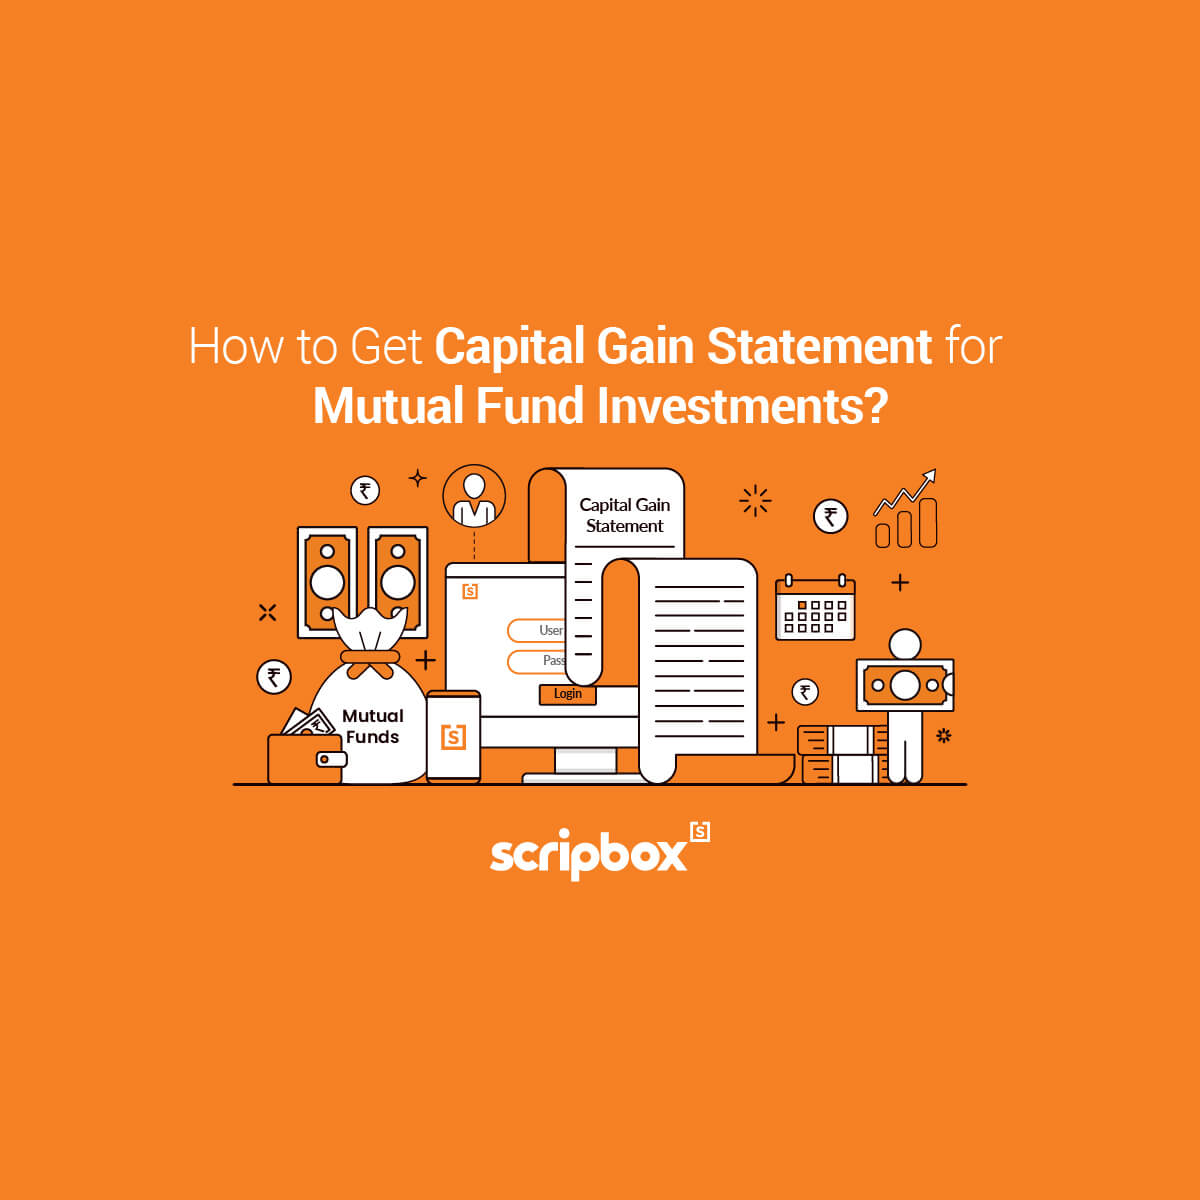 capital gain statement for mutual fund investments